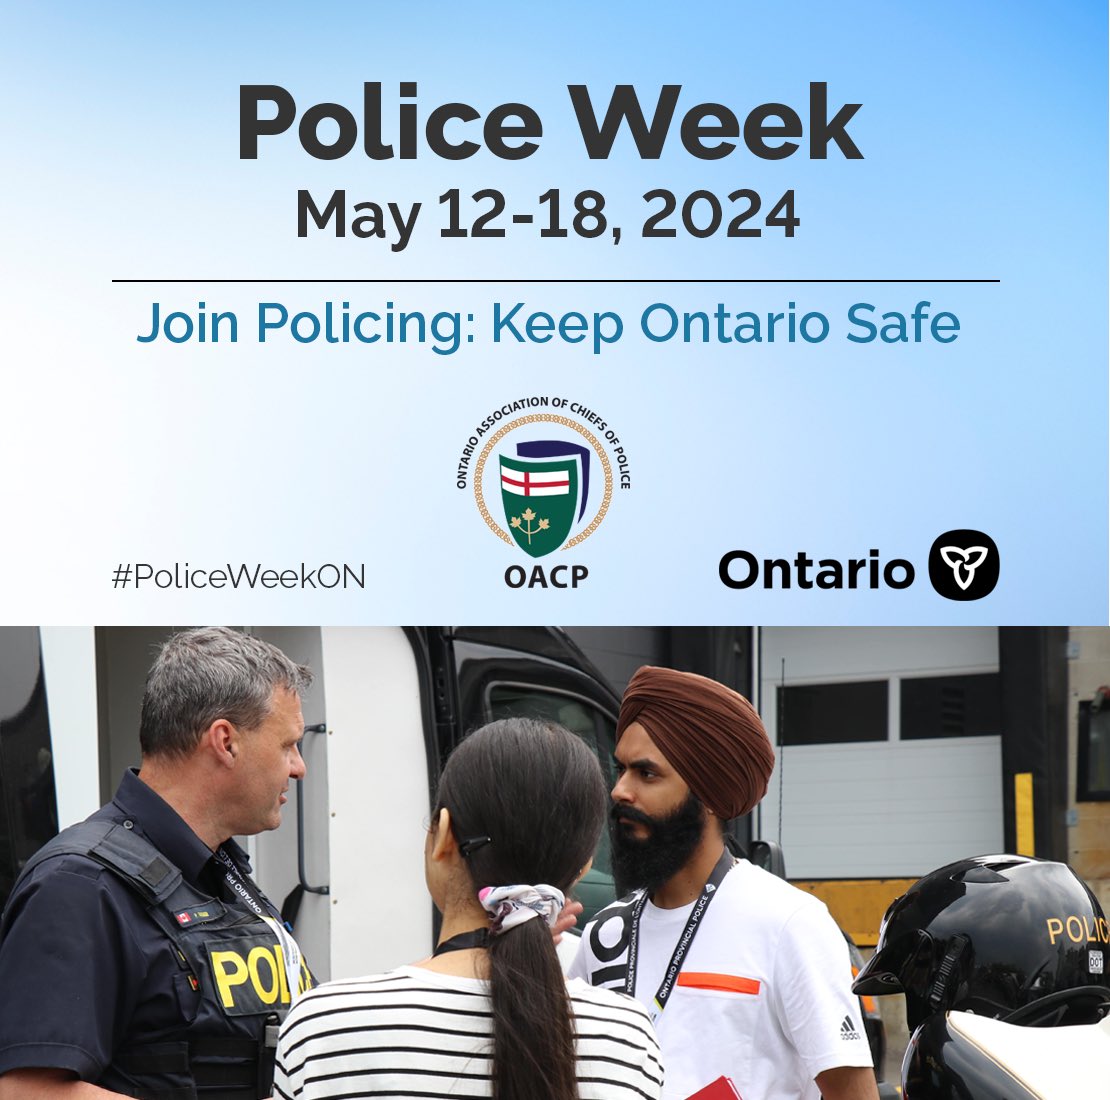 It’s #PoliceWeekON in Ontario! 🚓 Thank you to @DRPS (Durham Regional Police) for working to keep #durham safe! #onpoli #police #safety